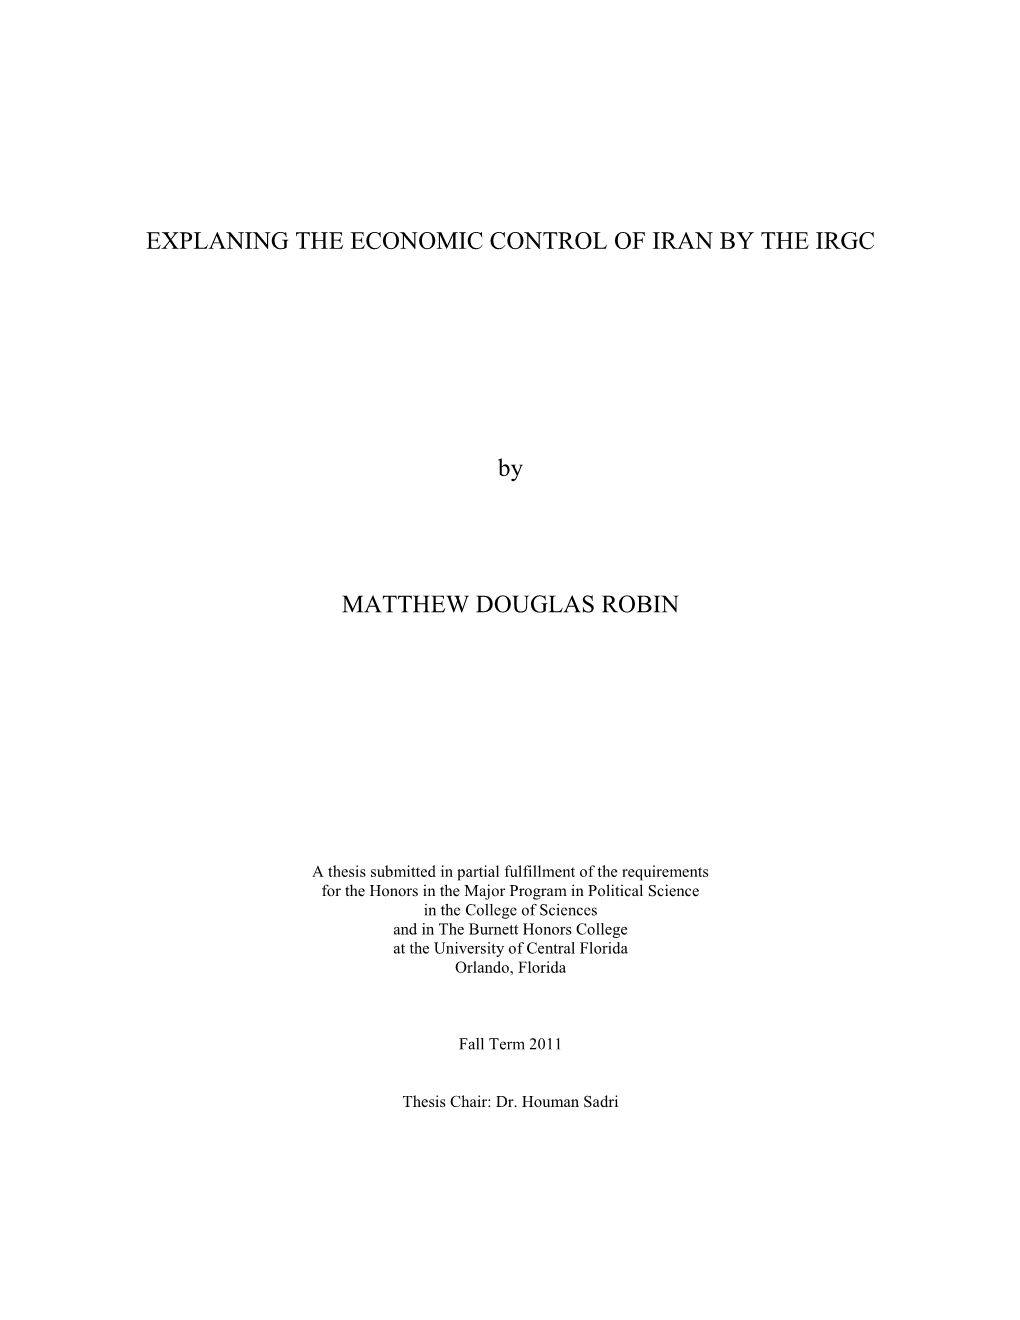 EXPLANING the ECONOMIC CONTROL of IRAN by the IRGC by MATTHEW DOUGLAS ROBIN